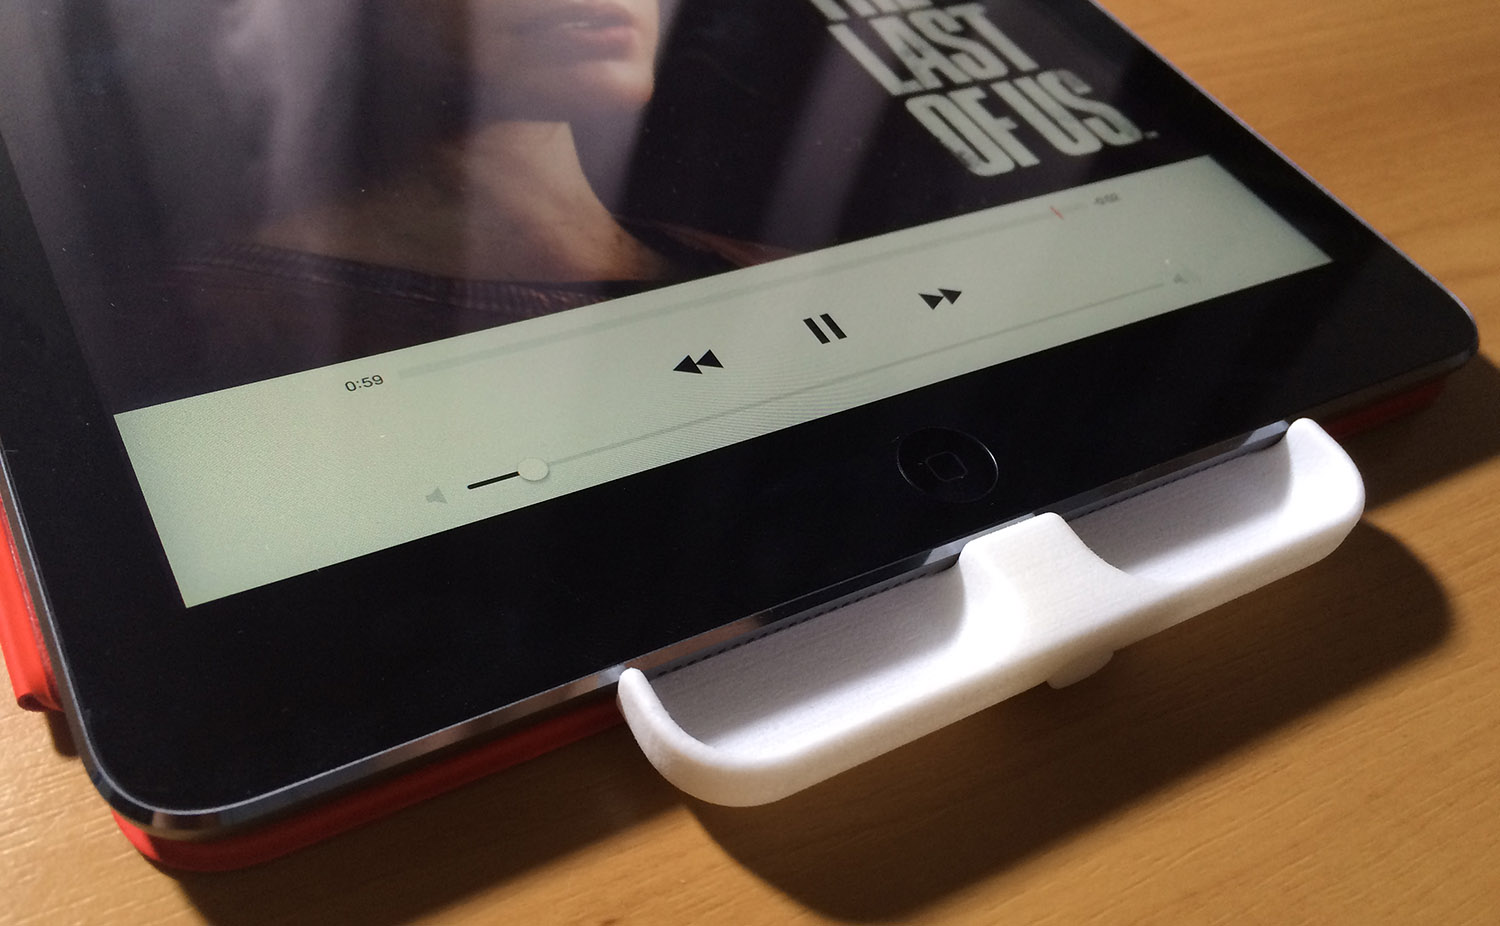 The 3D printed evaluation model of the iPad SpeakerSlide, attached to an iPad Air by the SpeakerSlide's Lightning port plug.